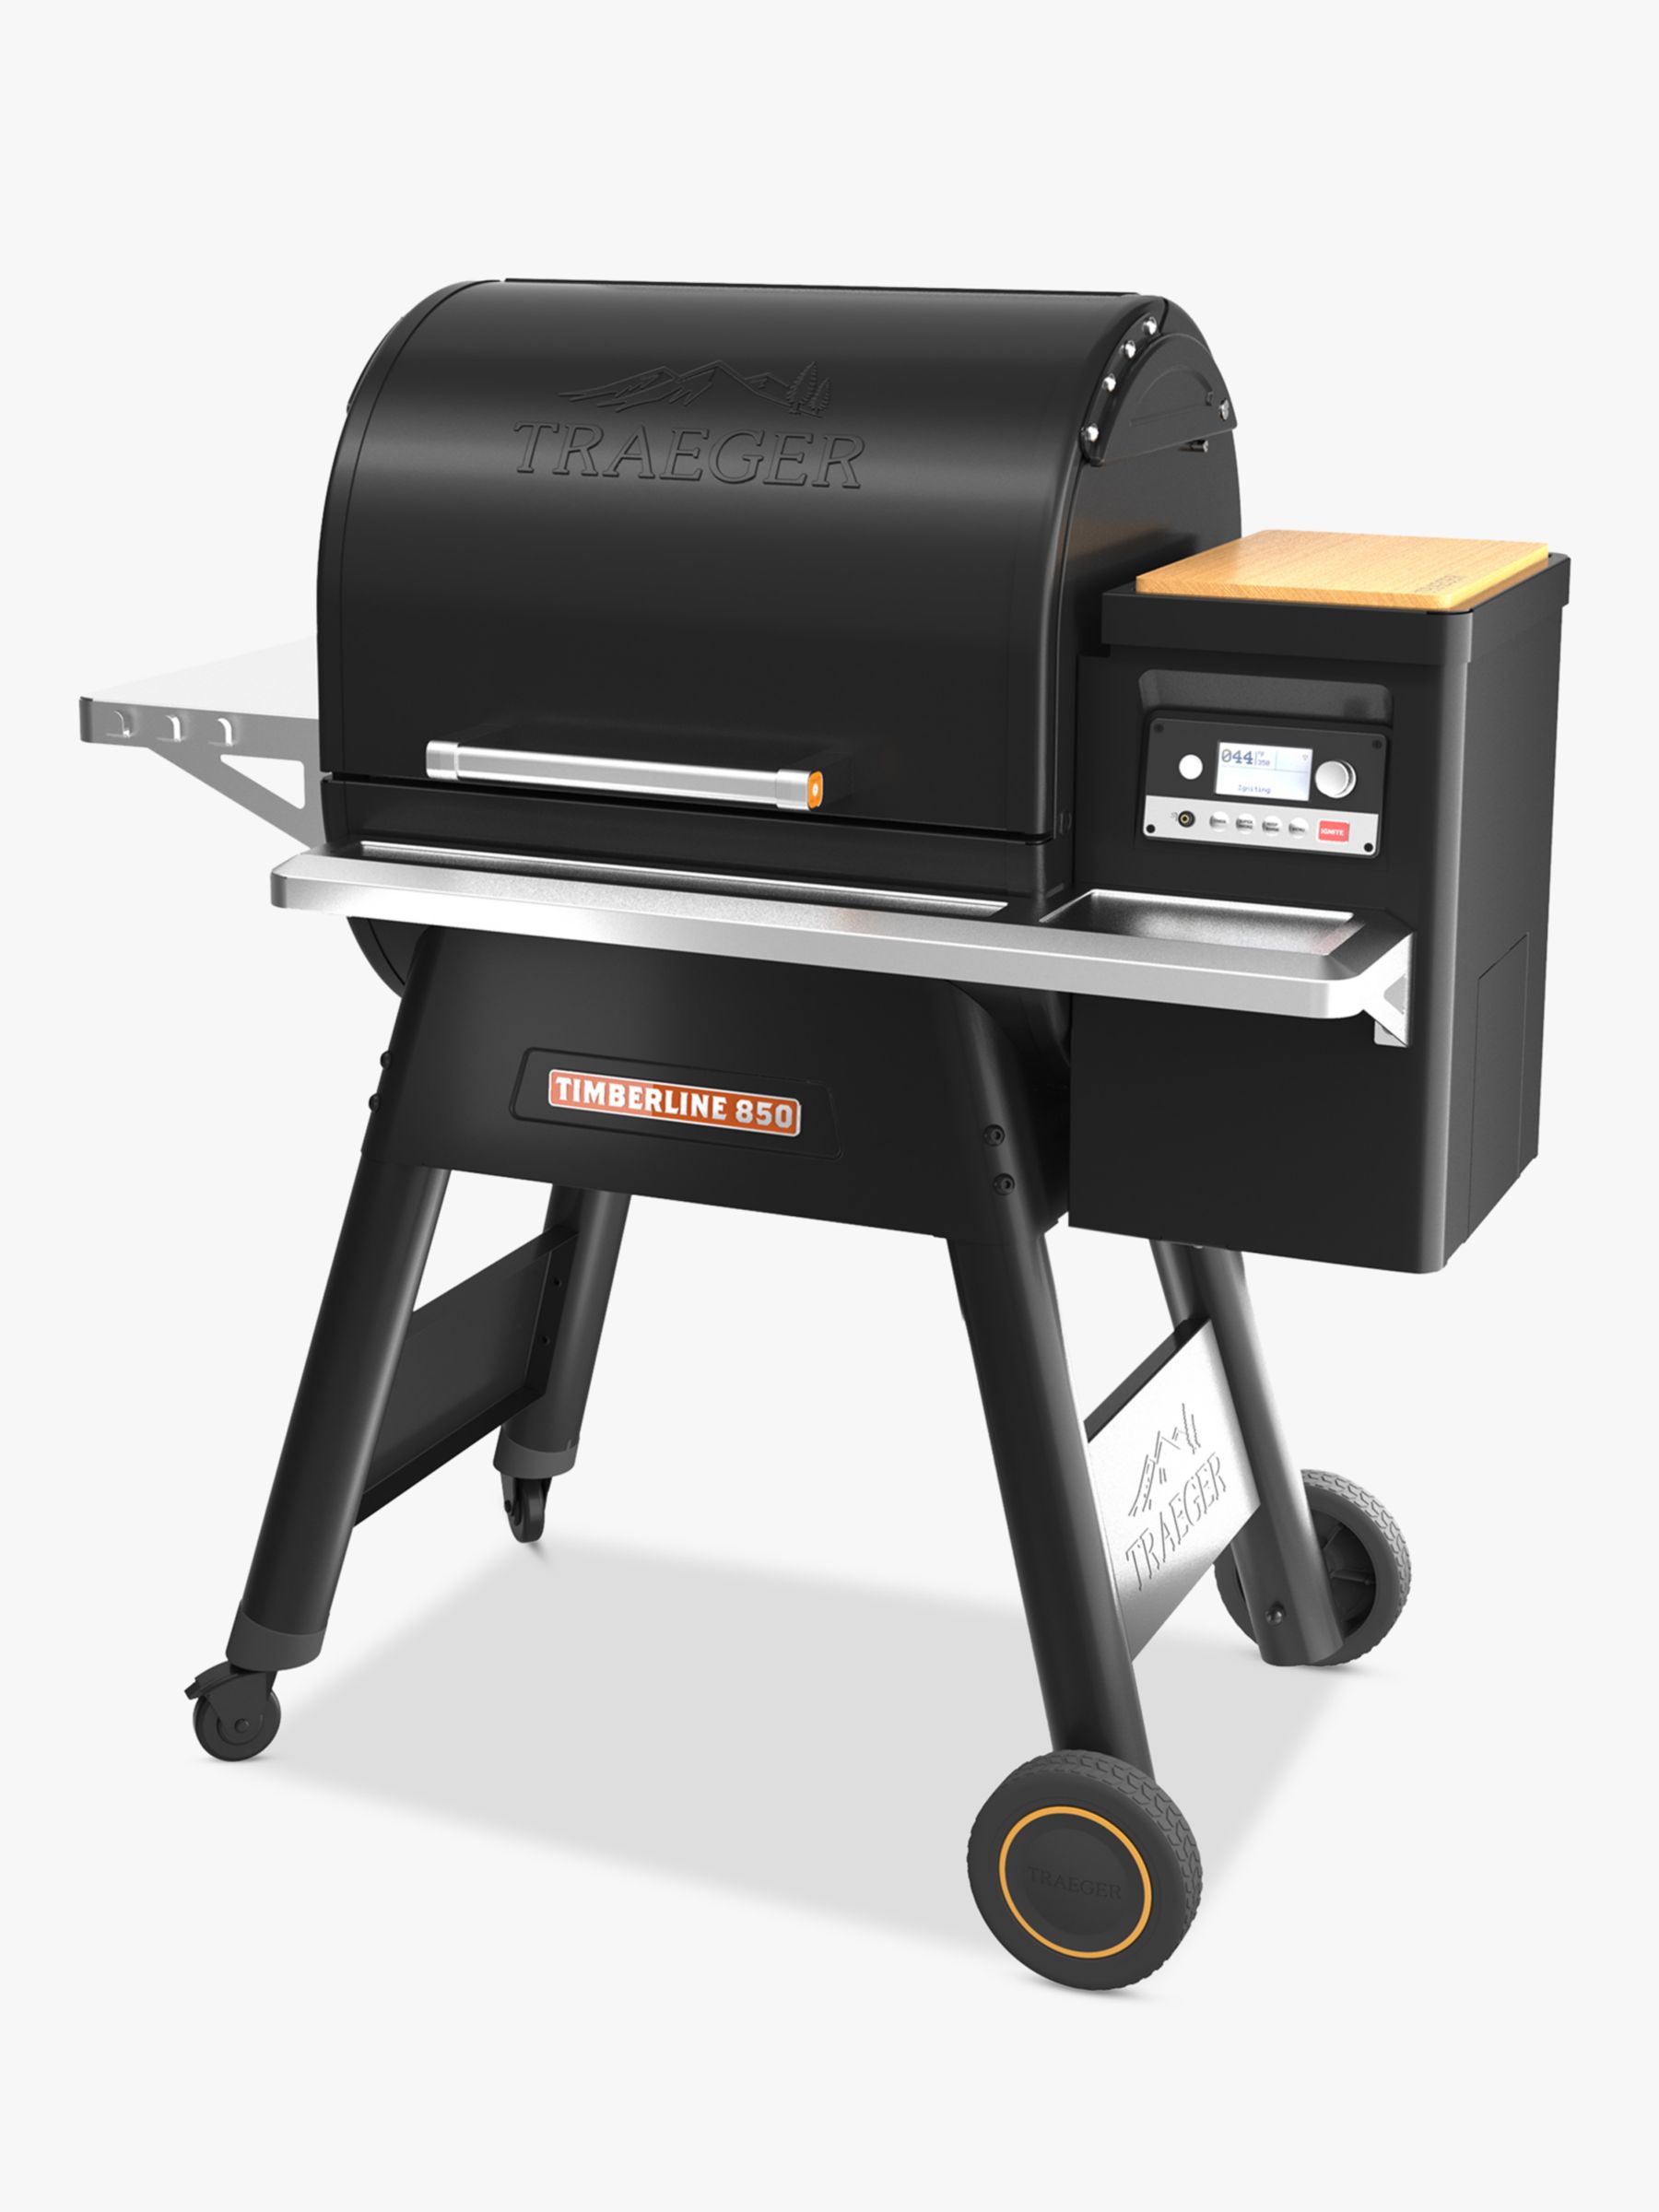 Traeger Timberline D2 850 WiFi Connected Wood Pellet BBQ, Black